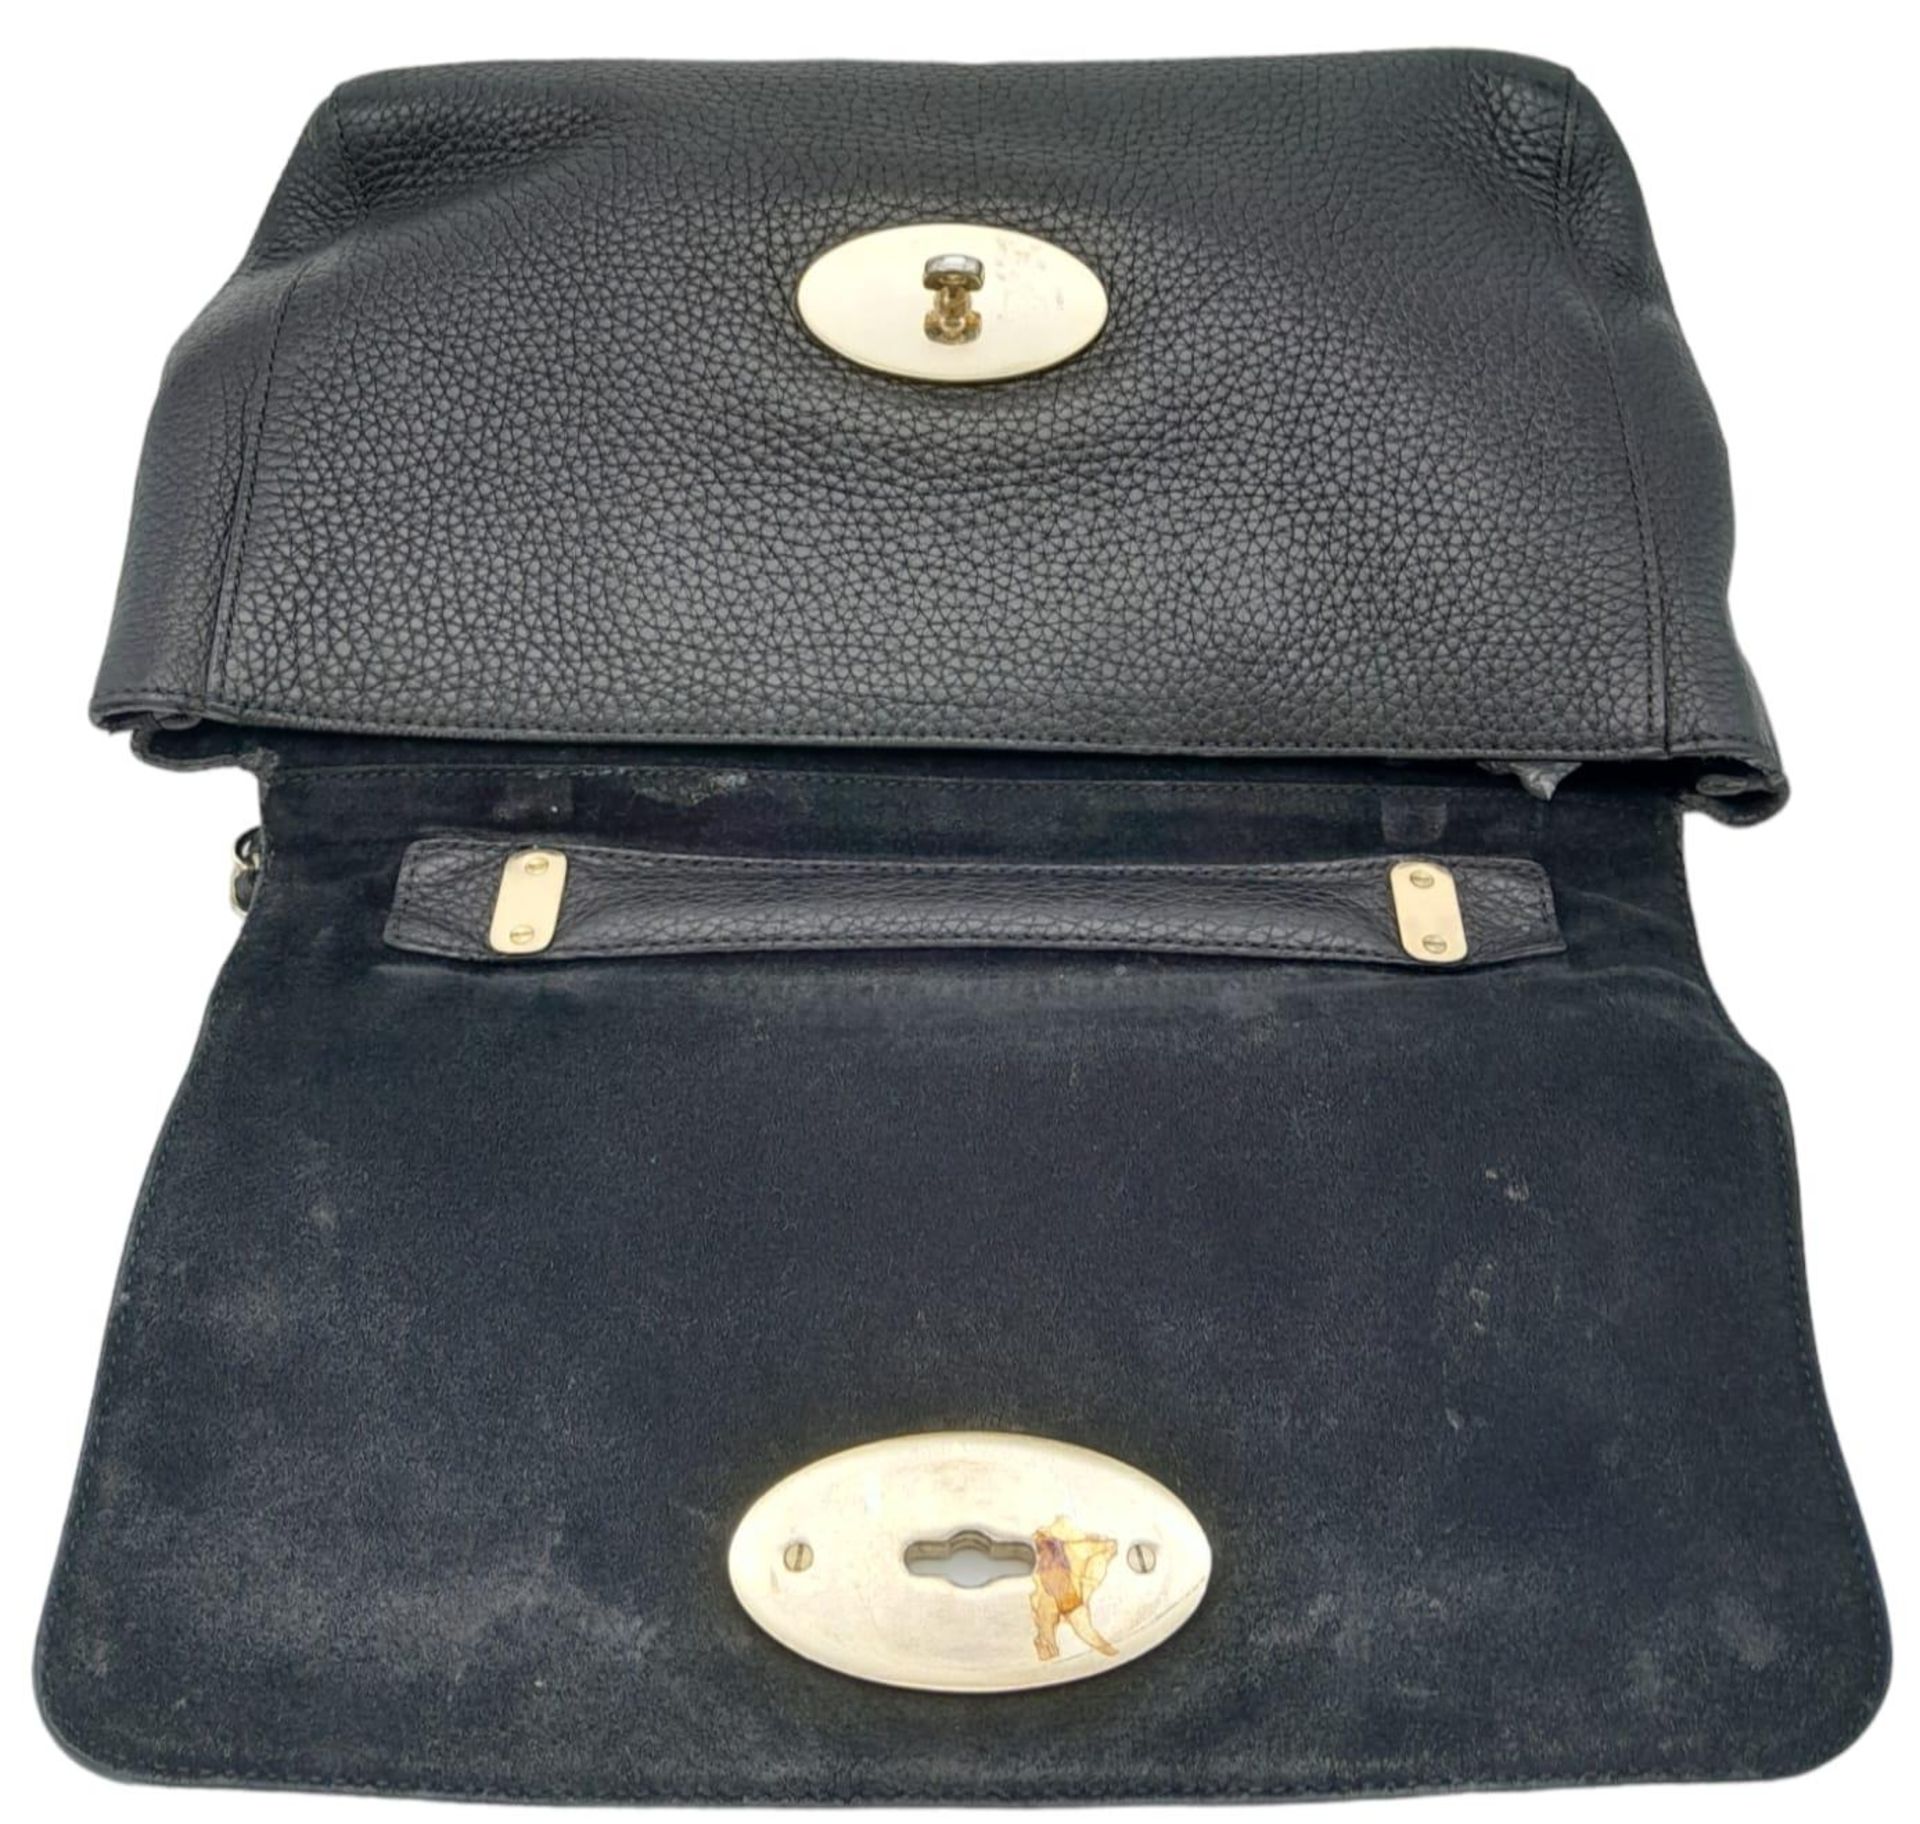 A Black Mulberry Lily Bag. With a Classic Grain Leather, Flap Over Design, Signature Postman Style - Bild 5 aus 10